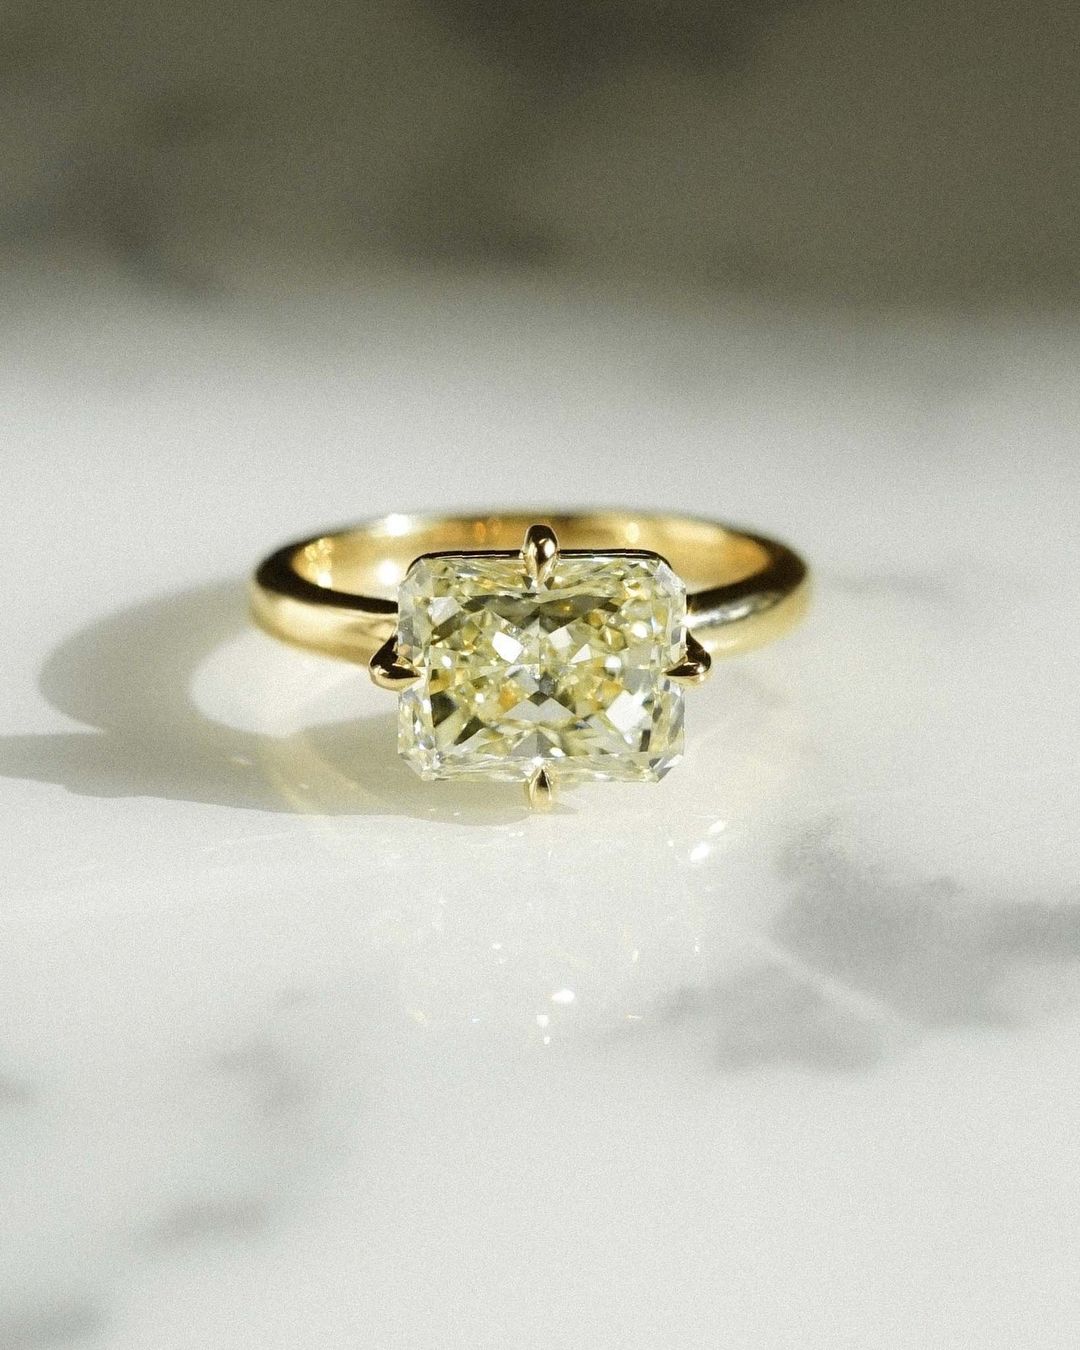 2.5Ct Canary Yellow Radiant Cut Solitaire Ring | Wedding Ring | Delicate Solo Diamond Ring | Elegant Ring